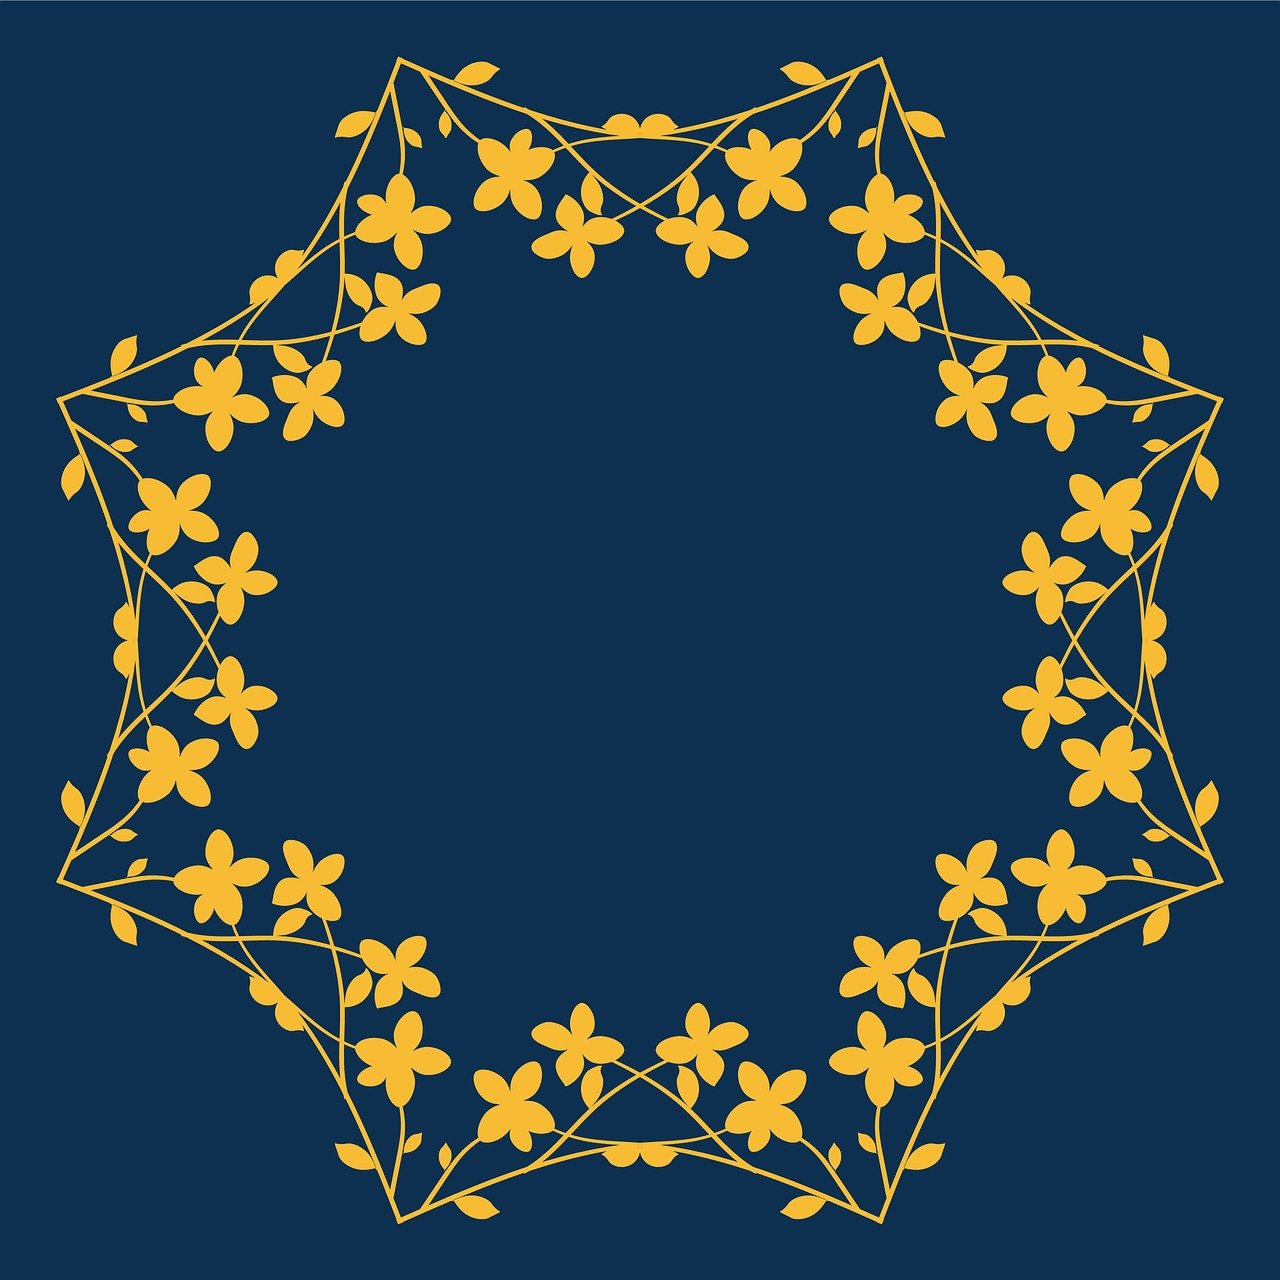 a decorative frame with yellow flowers on a blue background, inspired by Otto Frölicher, geometric patterns ornaments, circular shape, jasmine, dark blue color